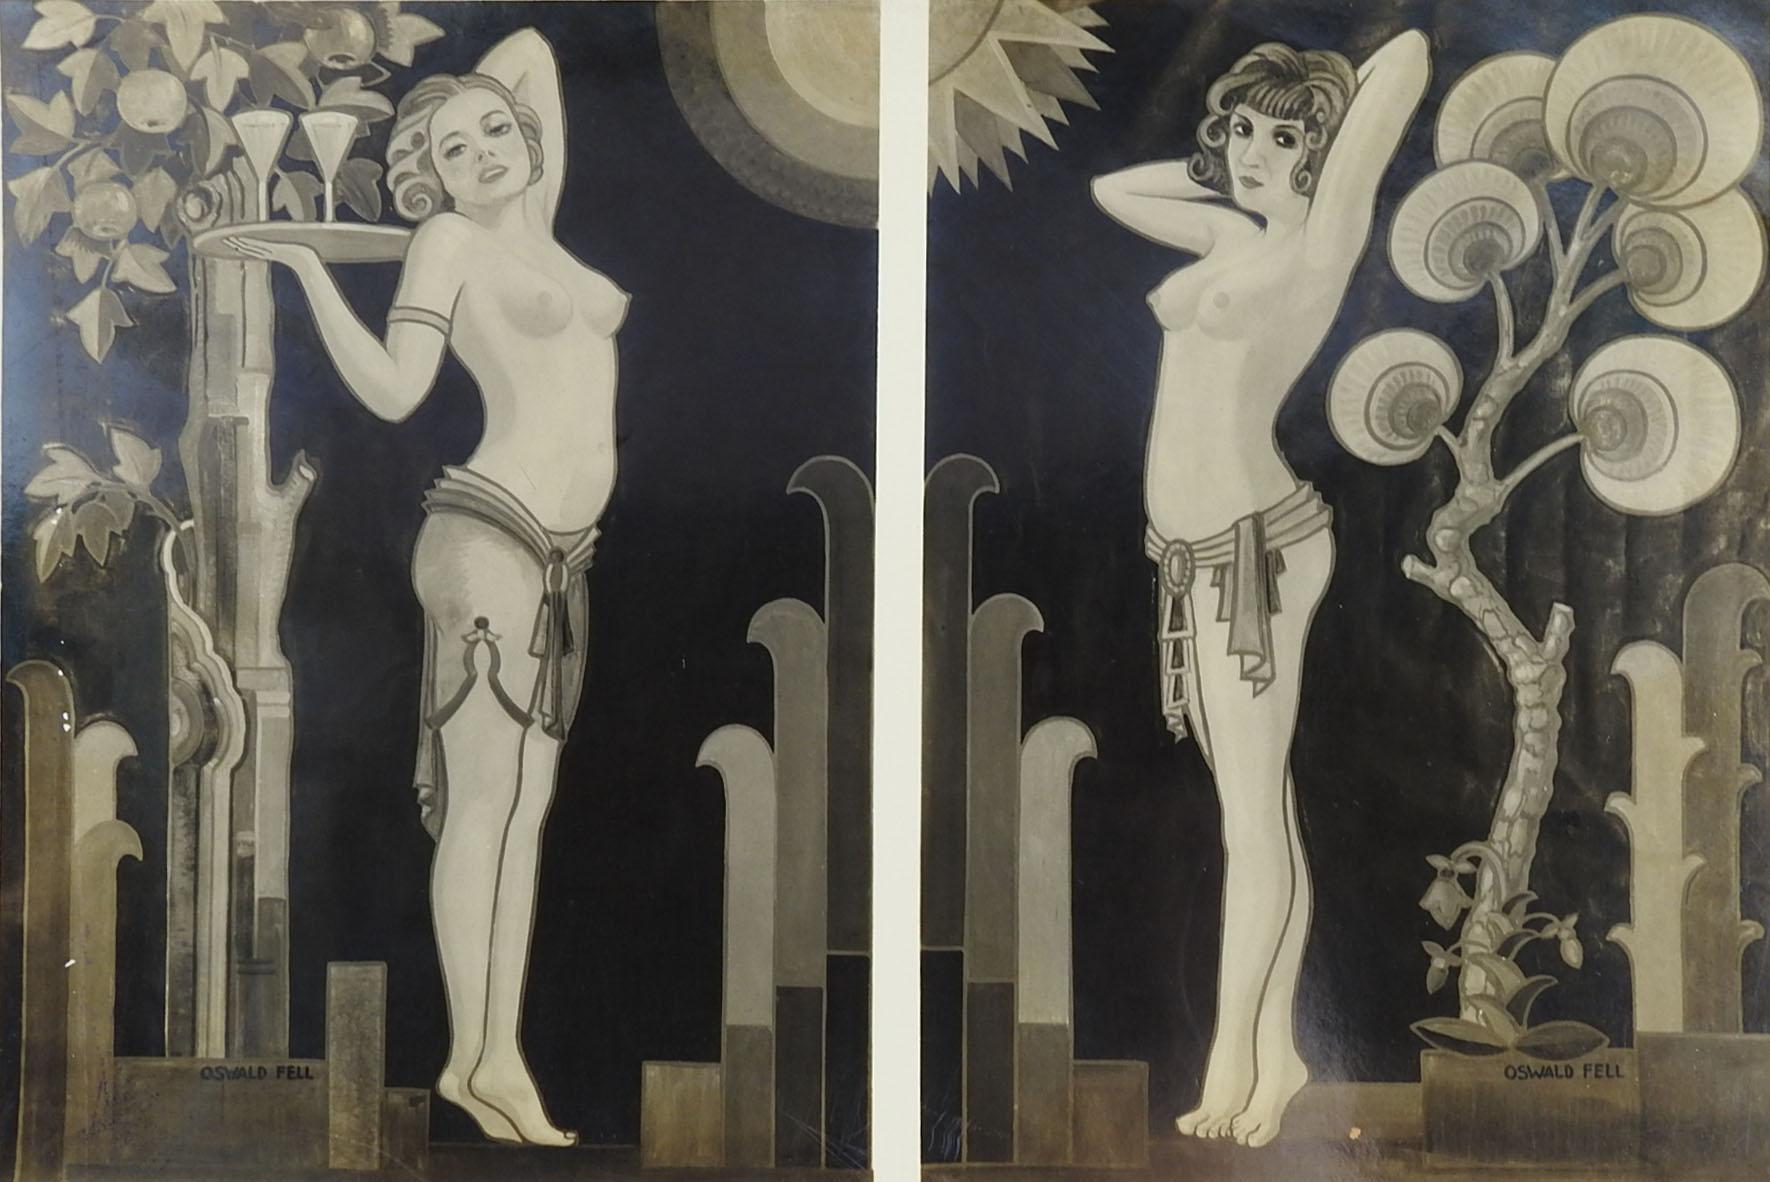 Photograph taken of an Art Deco figural mural painting by Oswald Fell (20th Century) Germany/Texas in the 1930's. Single photograph with 2 images on it, from the artists estate.  Unframed, edge wear.